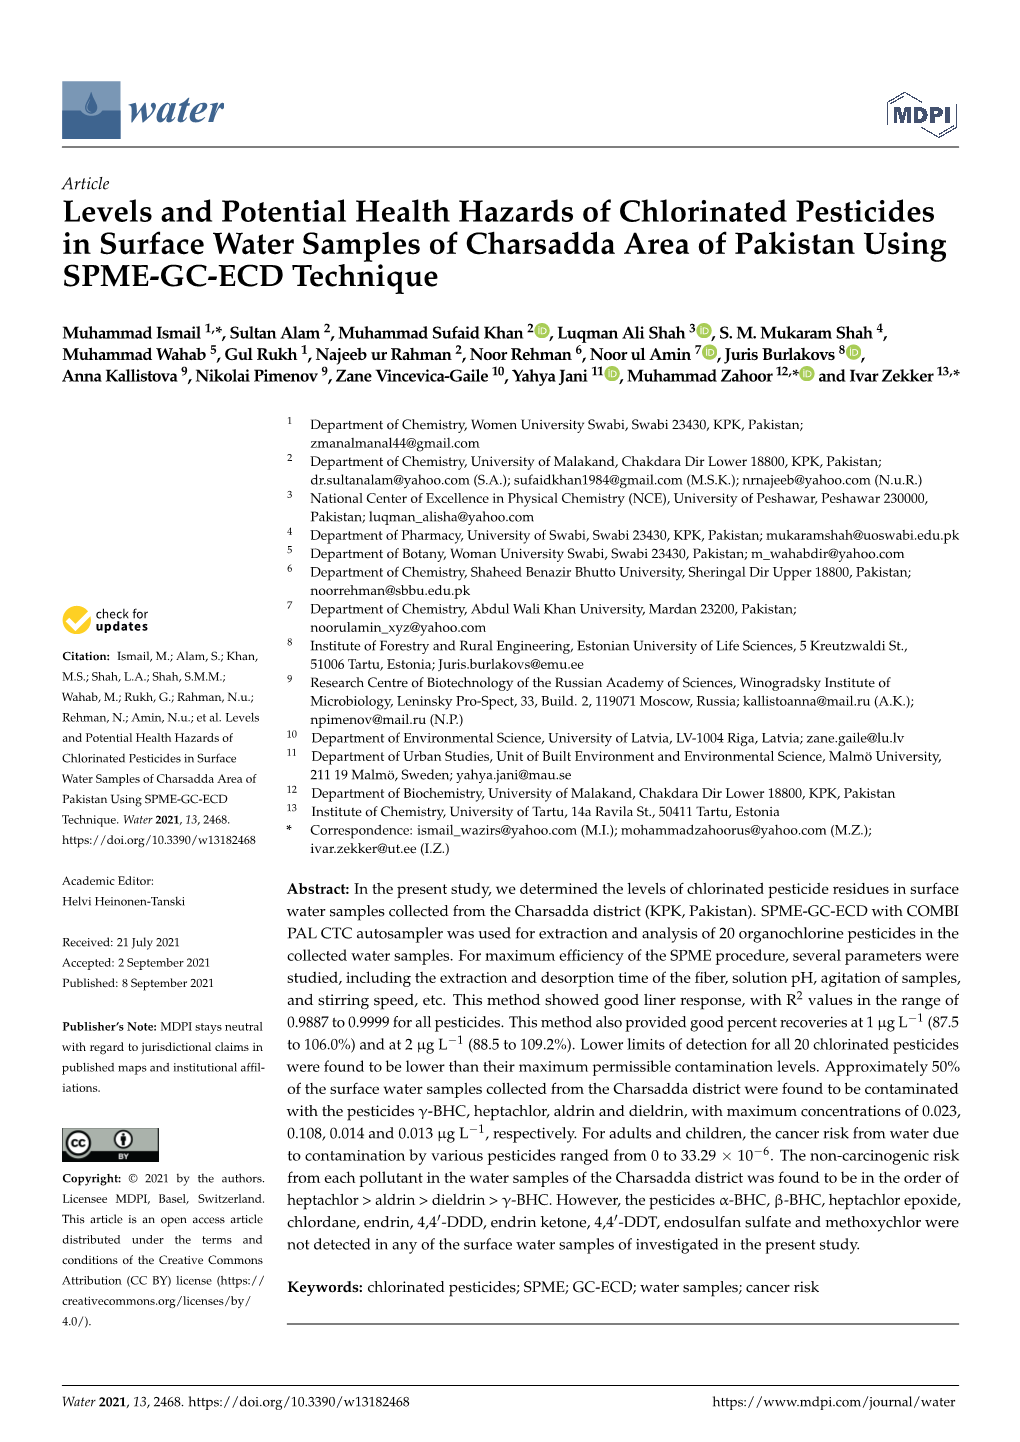 Levels and Potential Health Hazards of Chlorinated Pesticides in Surface Water Samples of Charsadda Area of Pakistan Using SPME-GC-ECD Technique